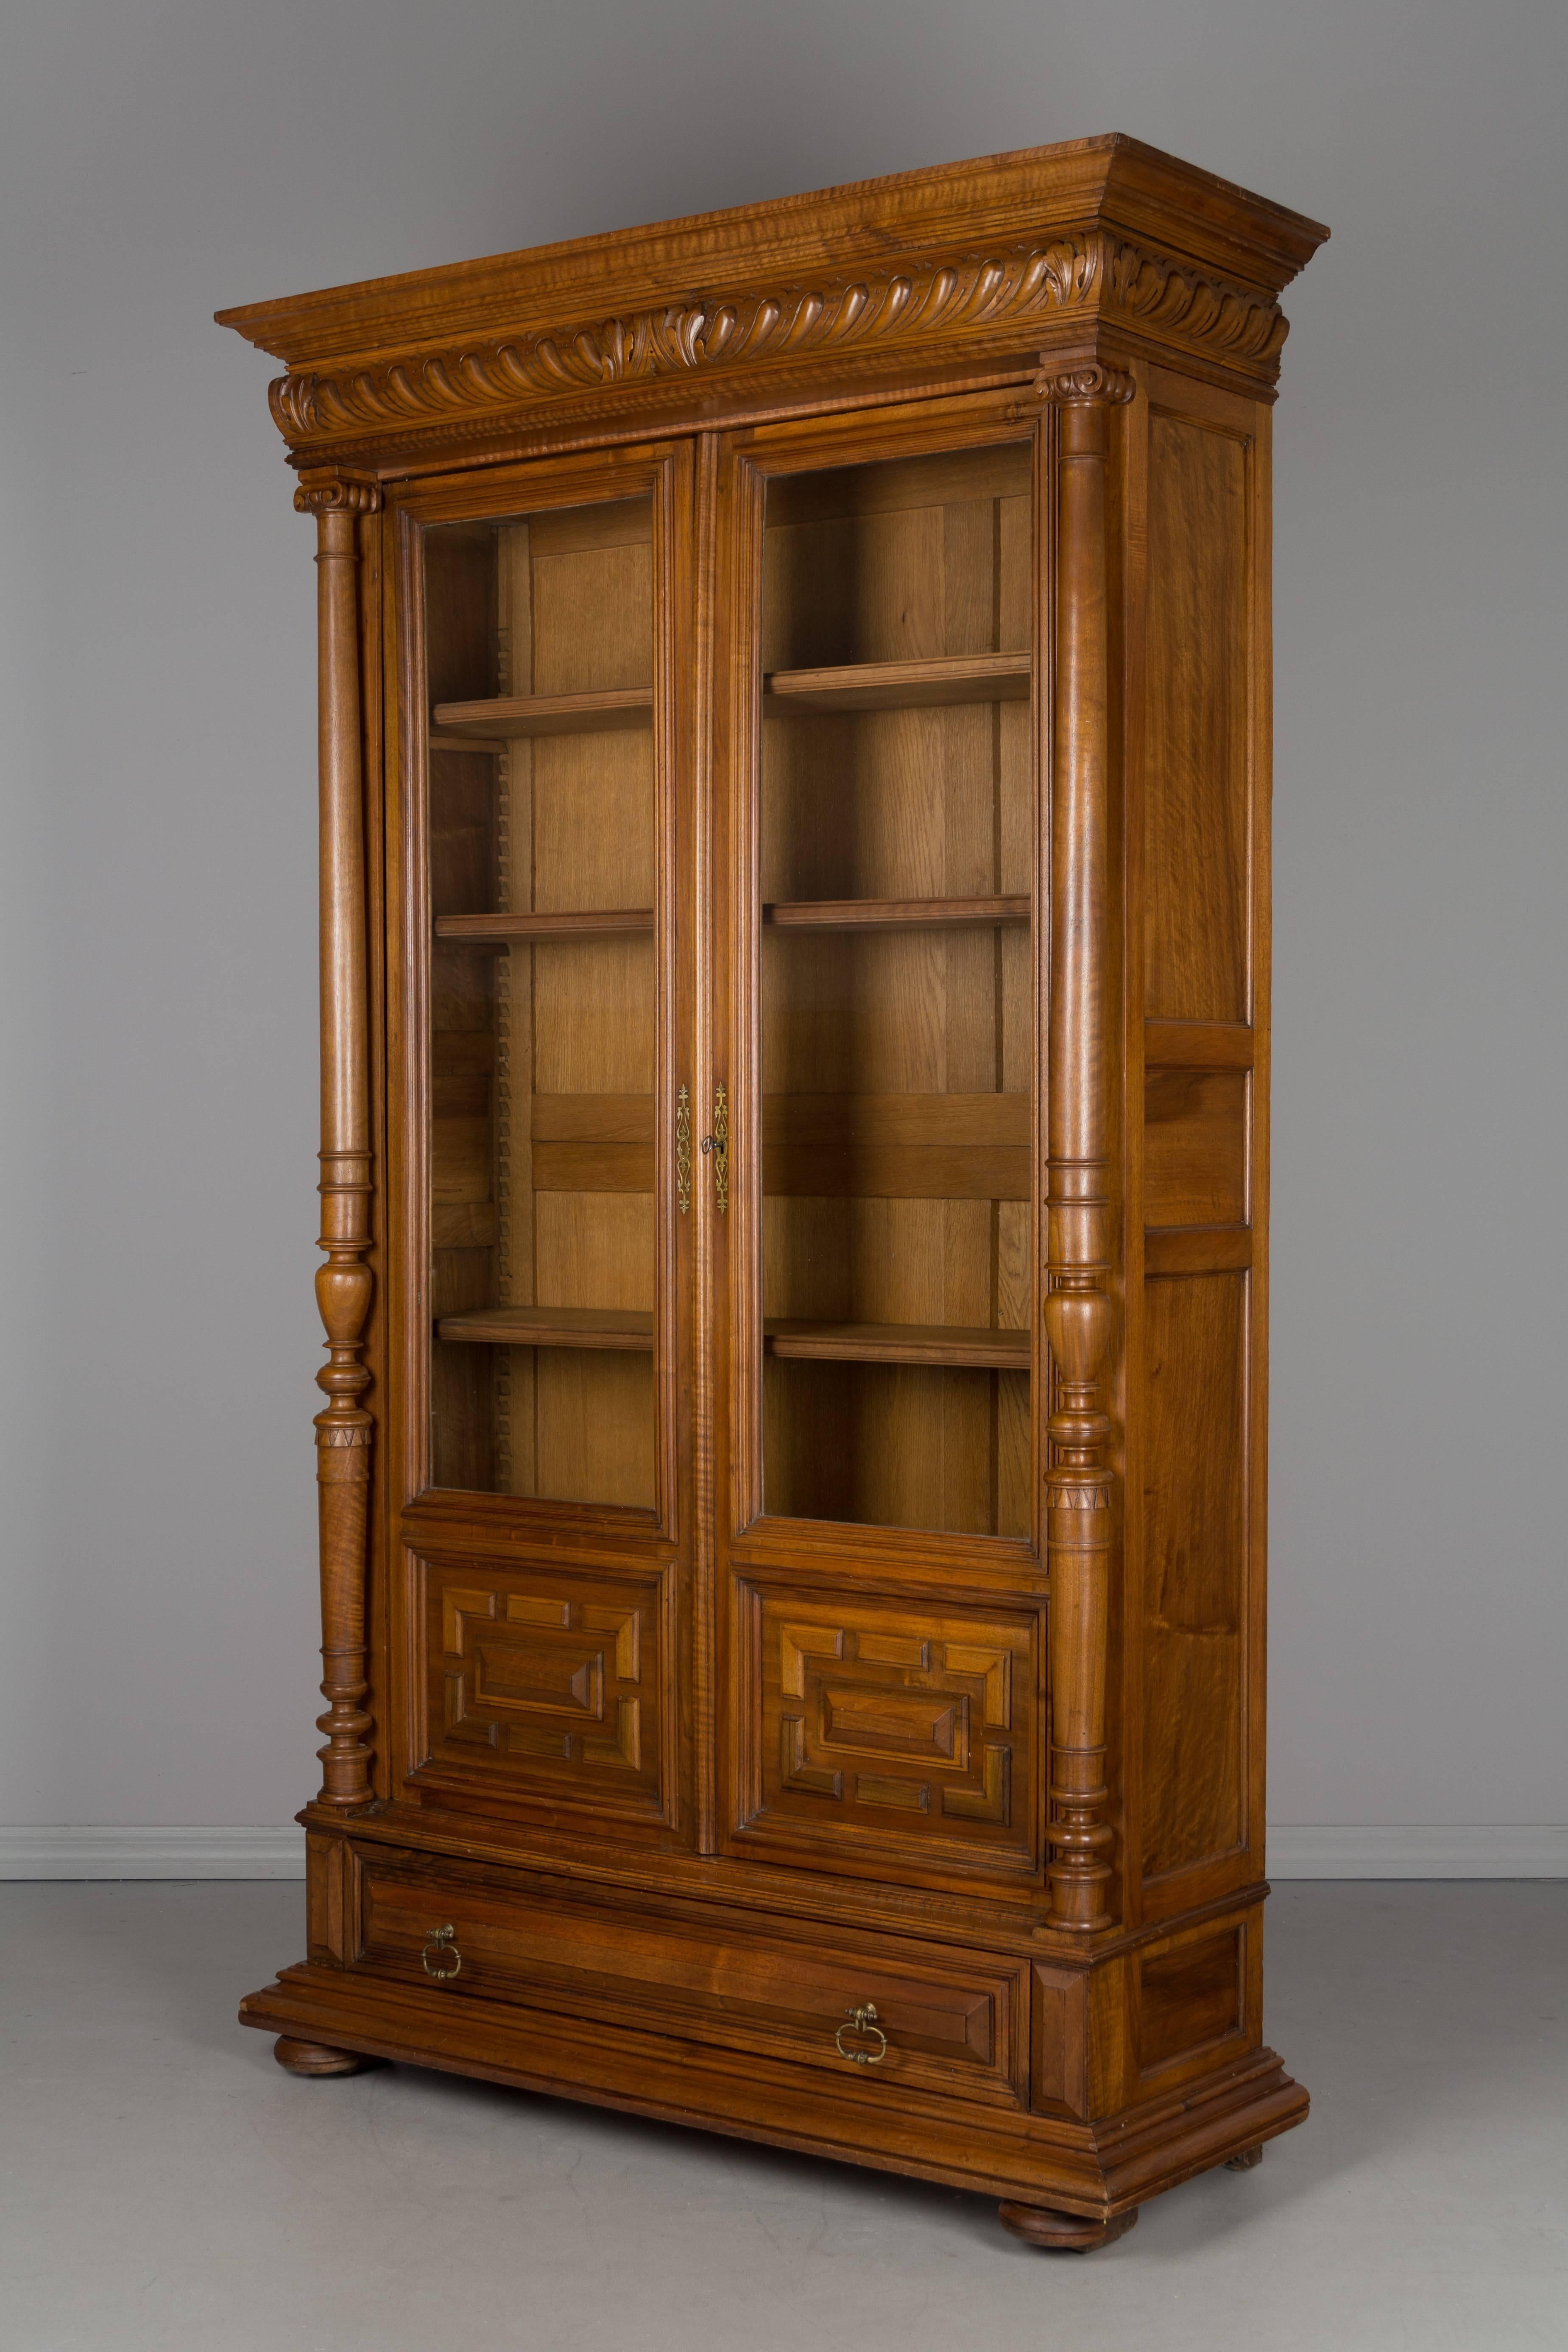 A 19th century, French Henri II style bibliotheque, or bookcase, made of solid walnut with fine carved details and turned columns. Single dovetailed drawer at the bottom with original brass pulls. Original glass paned doors with working lock and